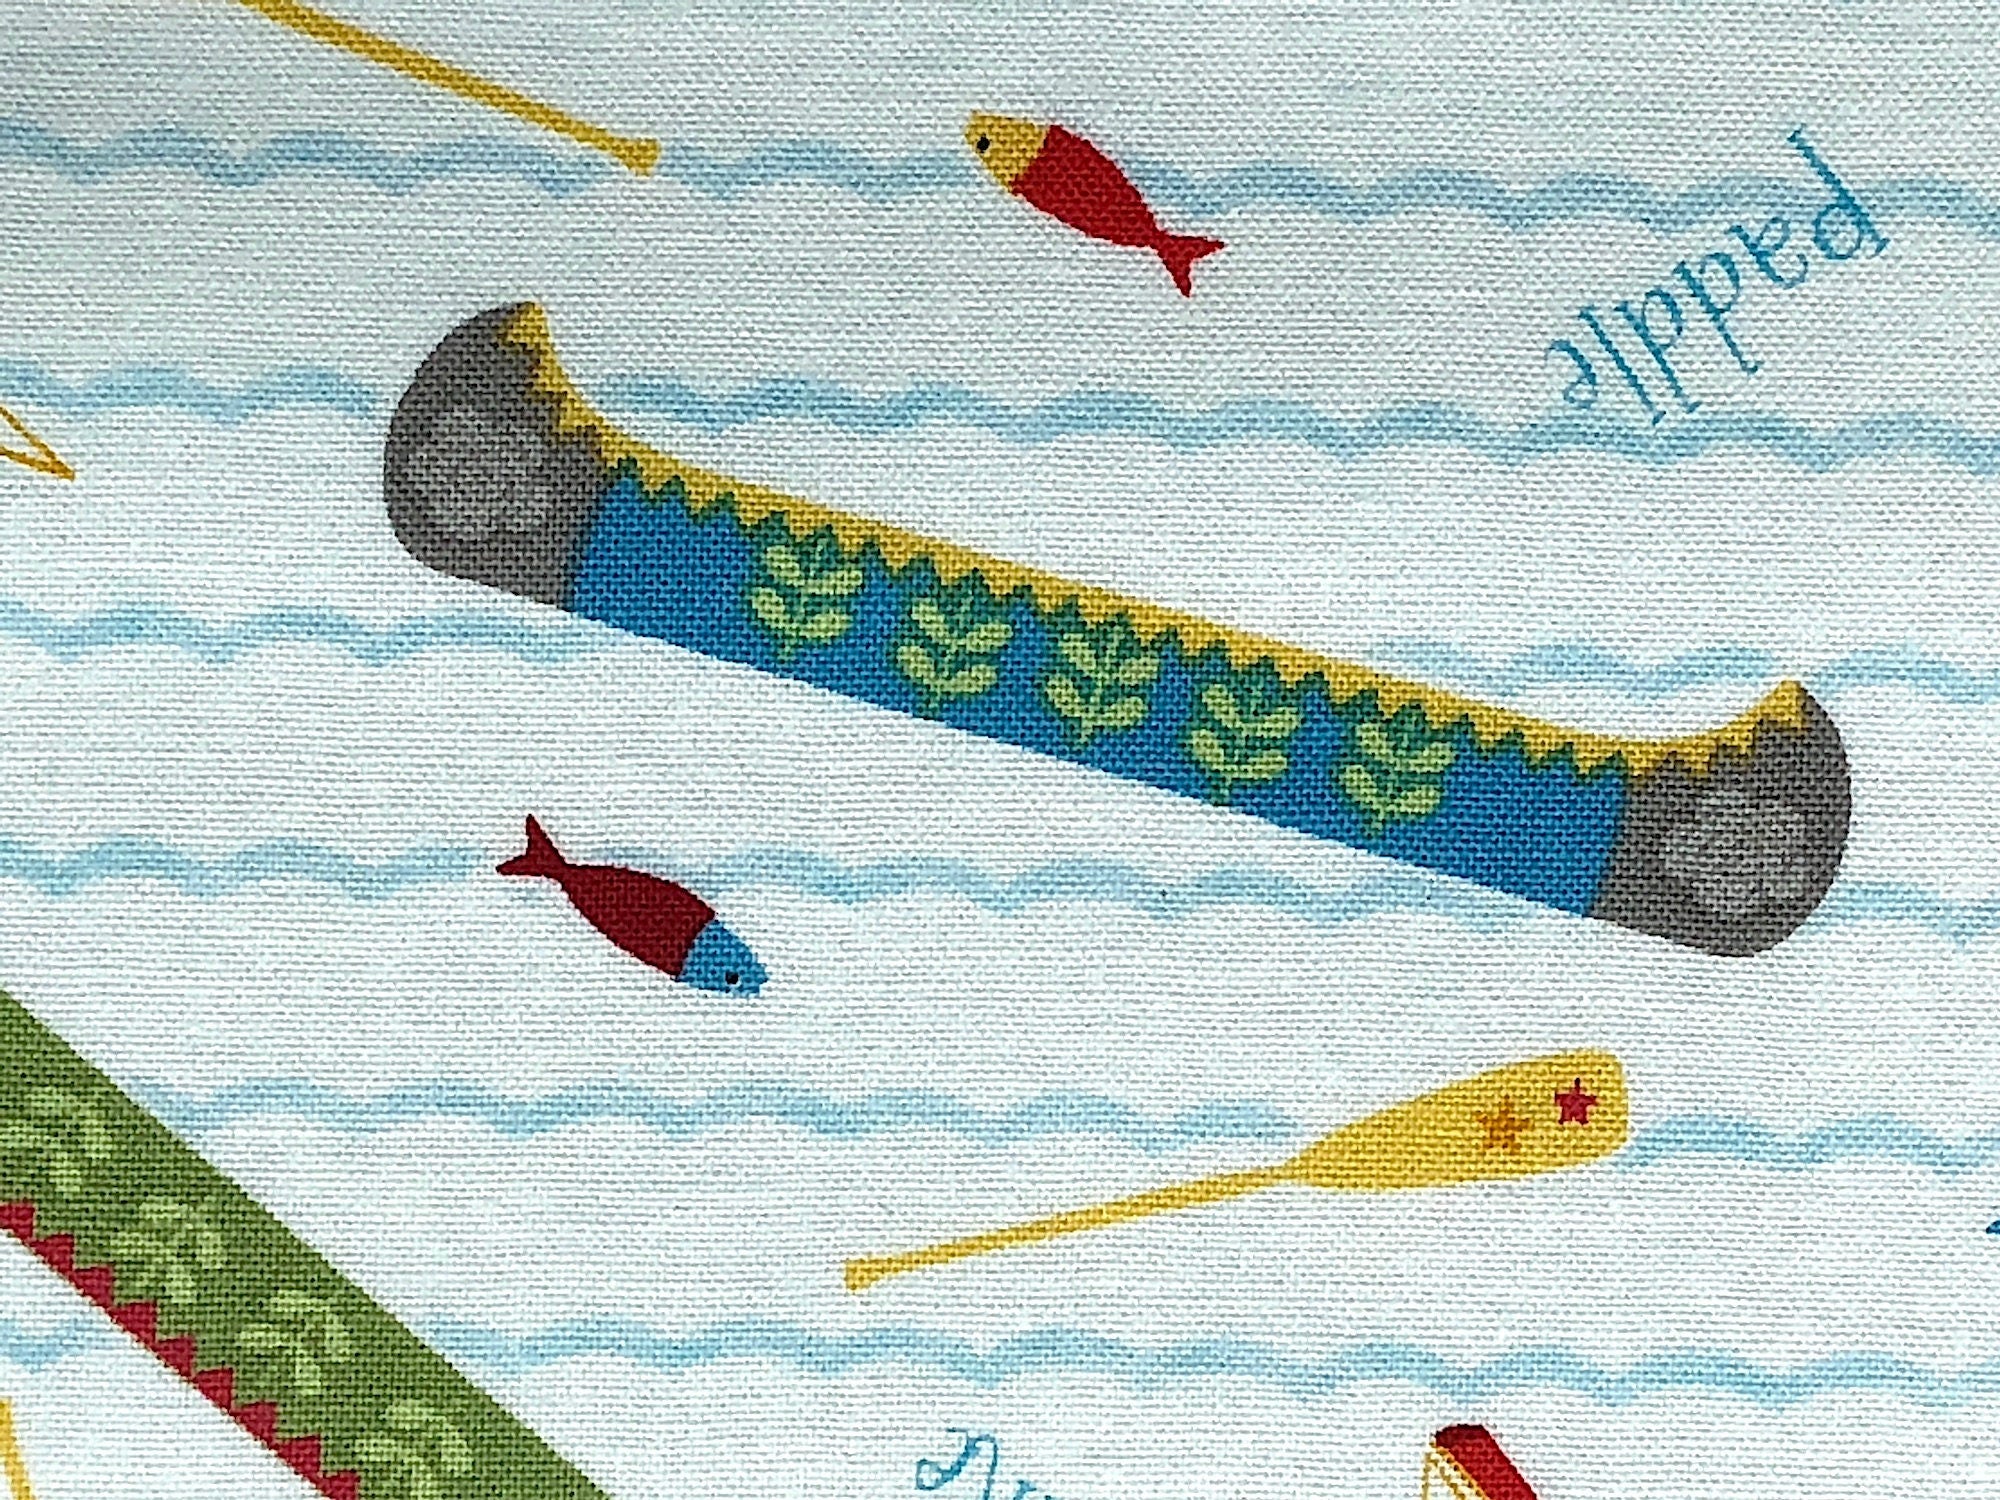 Close up of a canoe and oar.